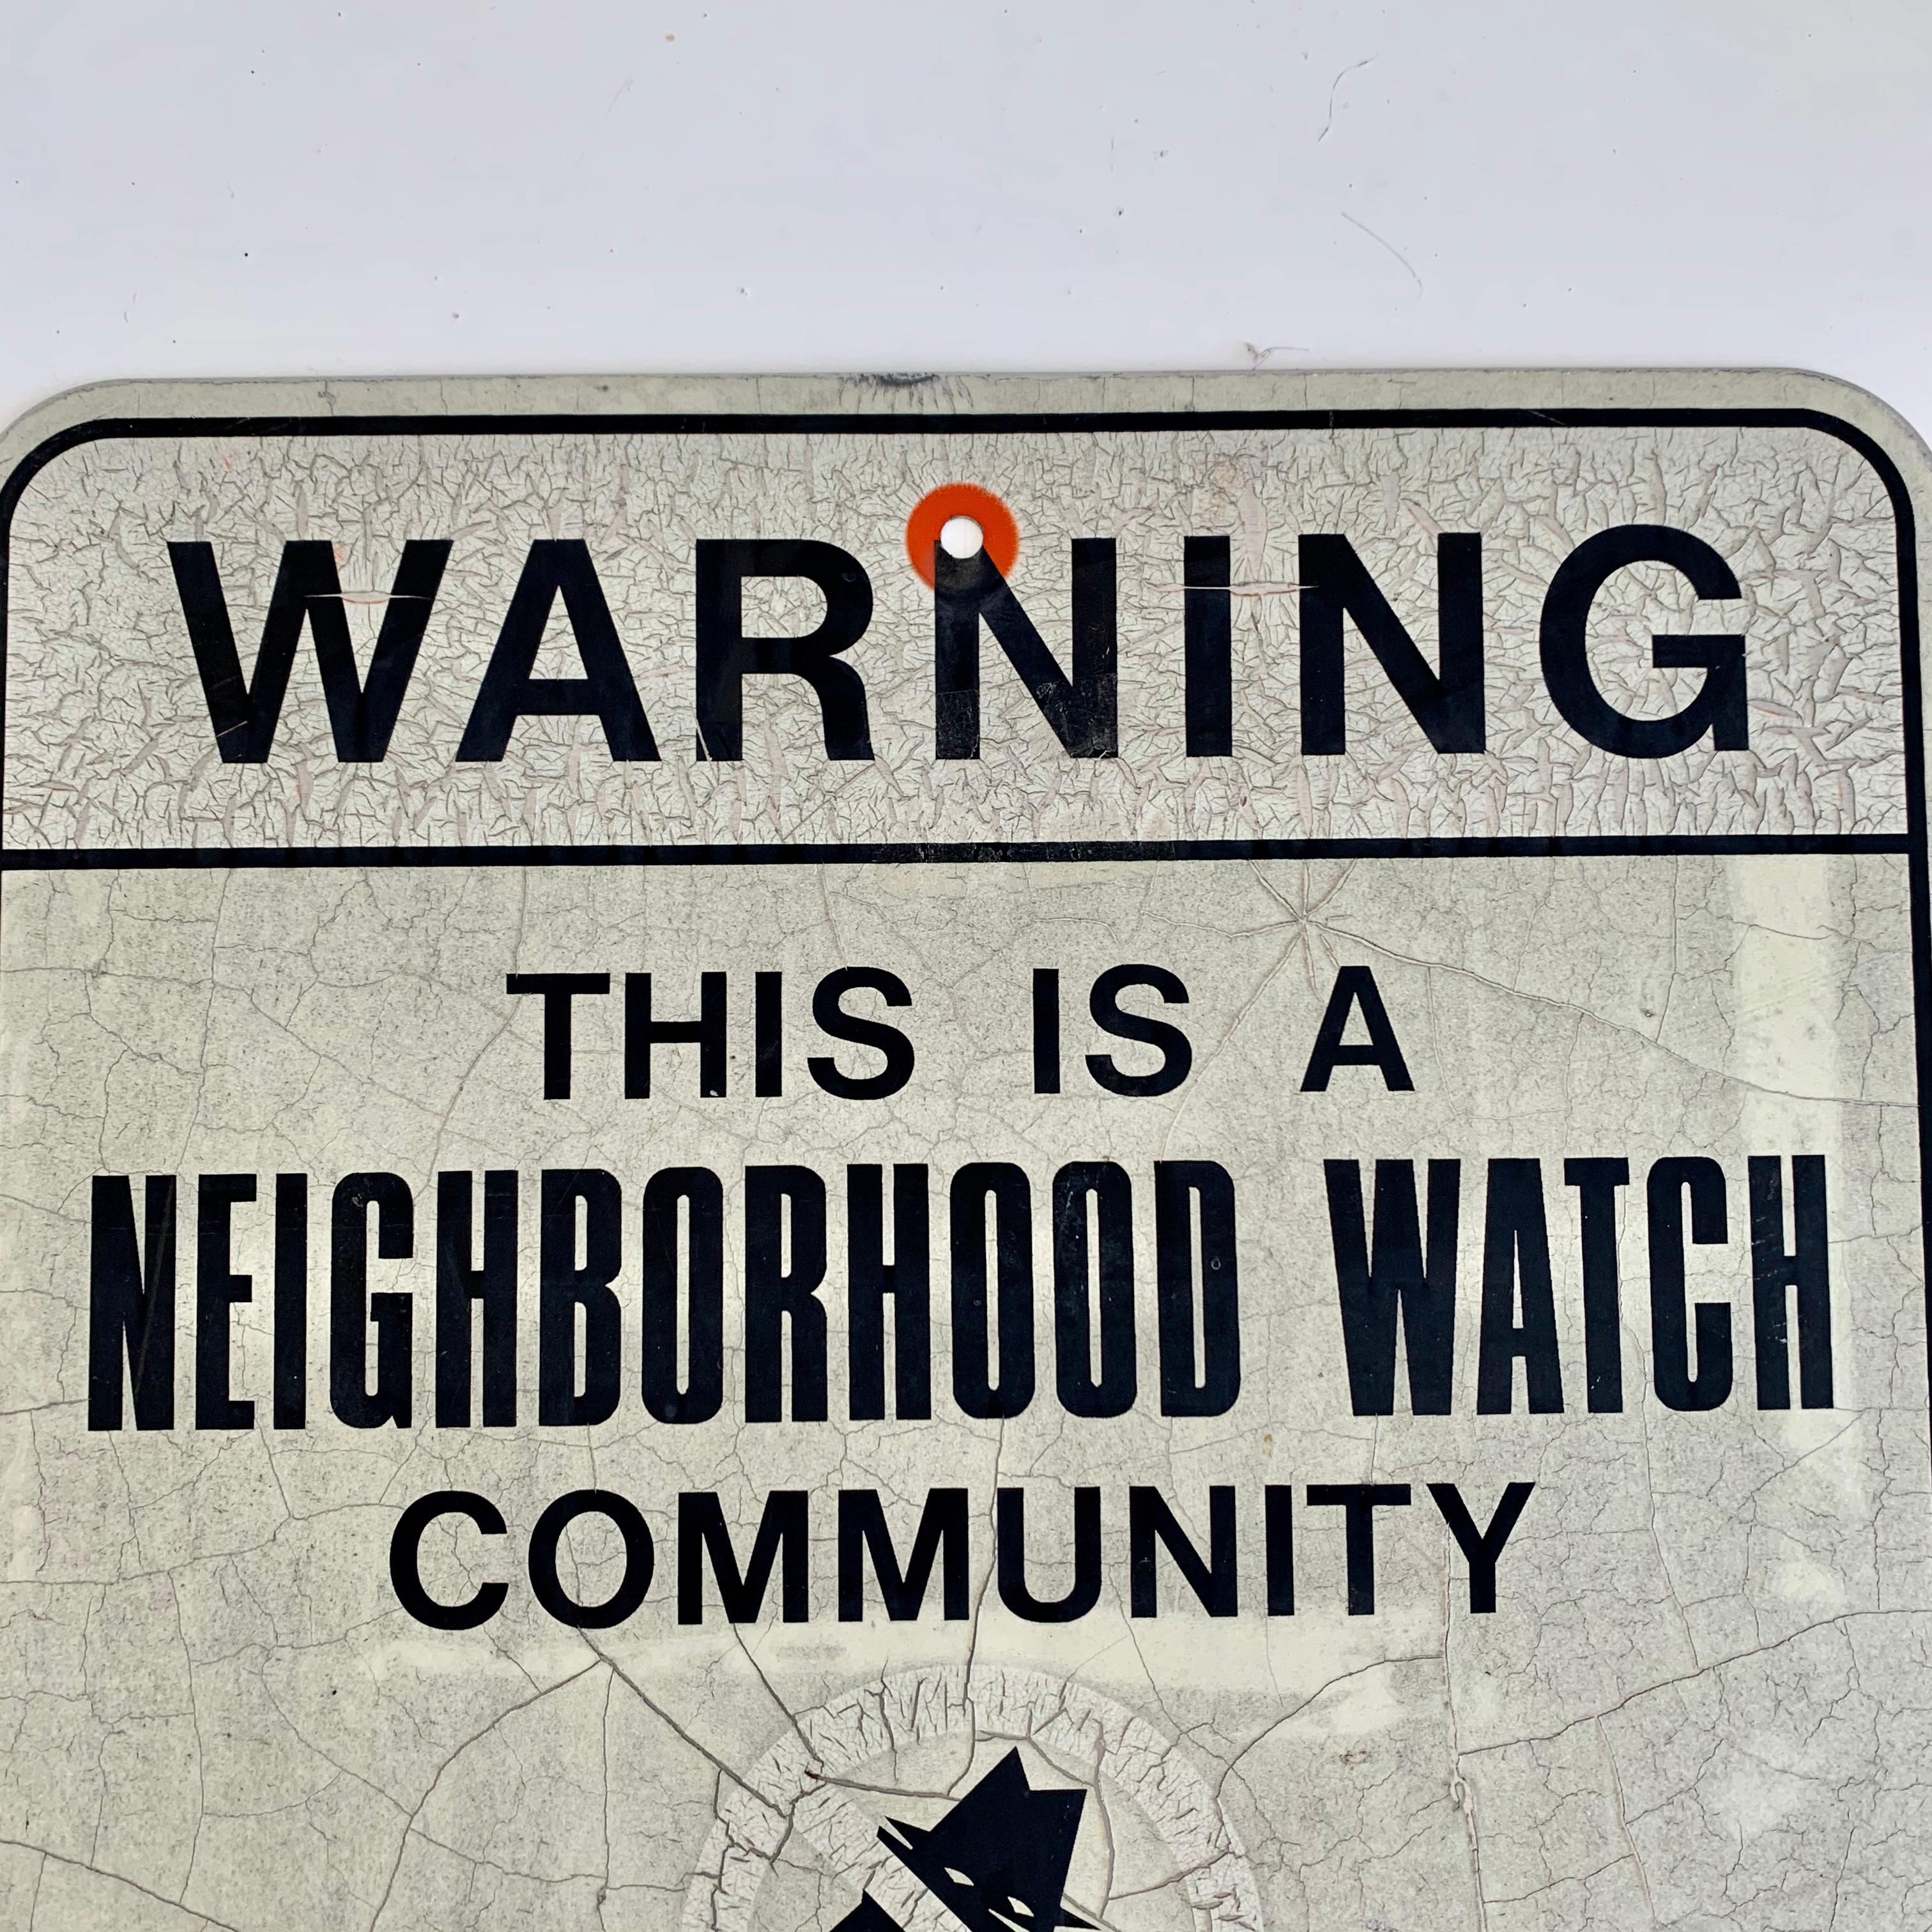 Vintage neighborhood watch sign. Much larger than the standard sized sign. Great muted coloring and graphics. Good vintage condition.